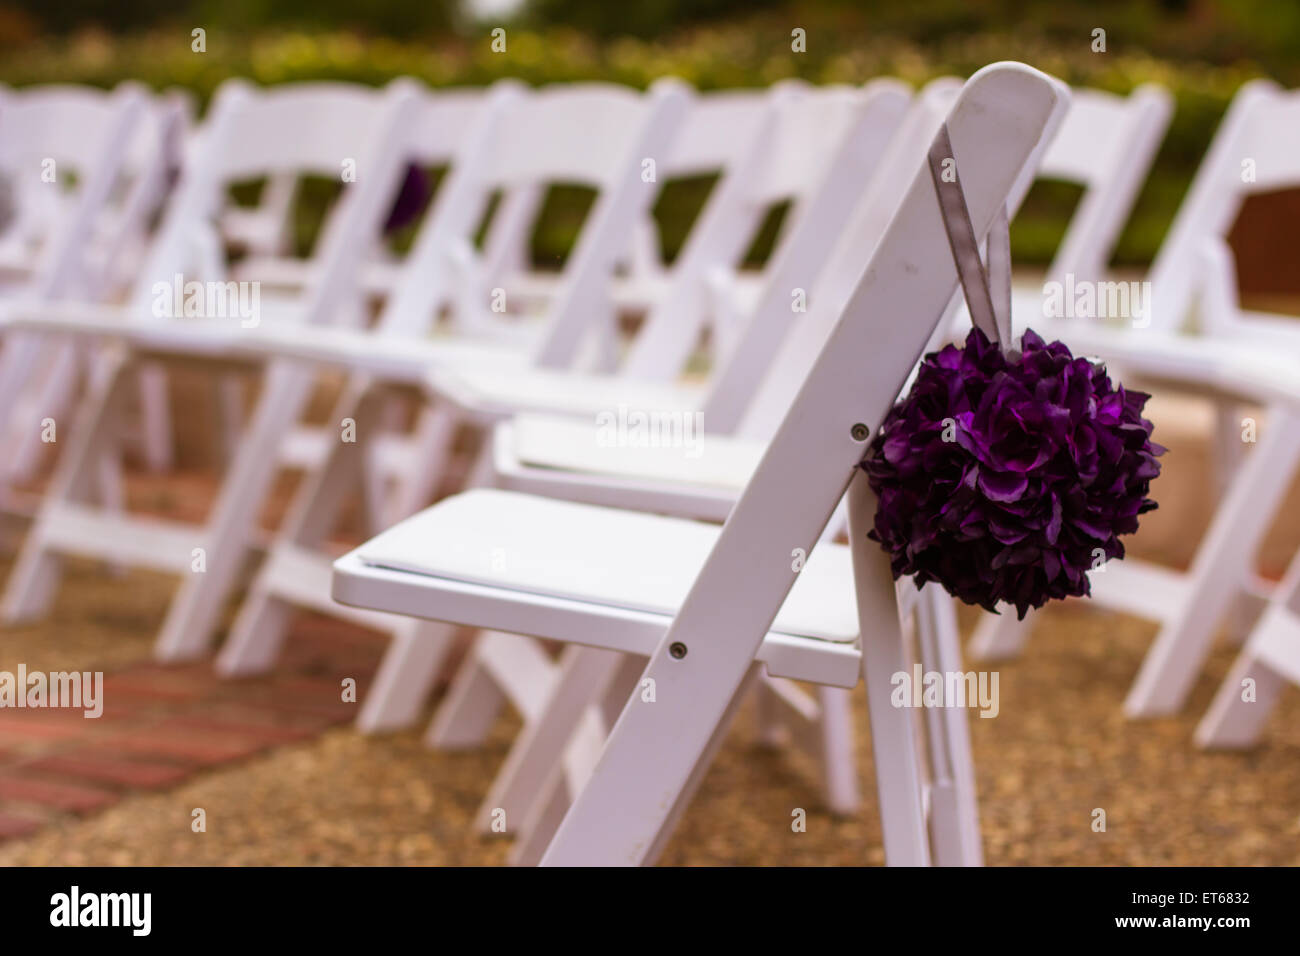 Chairs set for wedding in garden Stock Photo